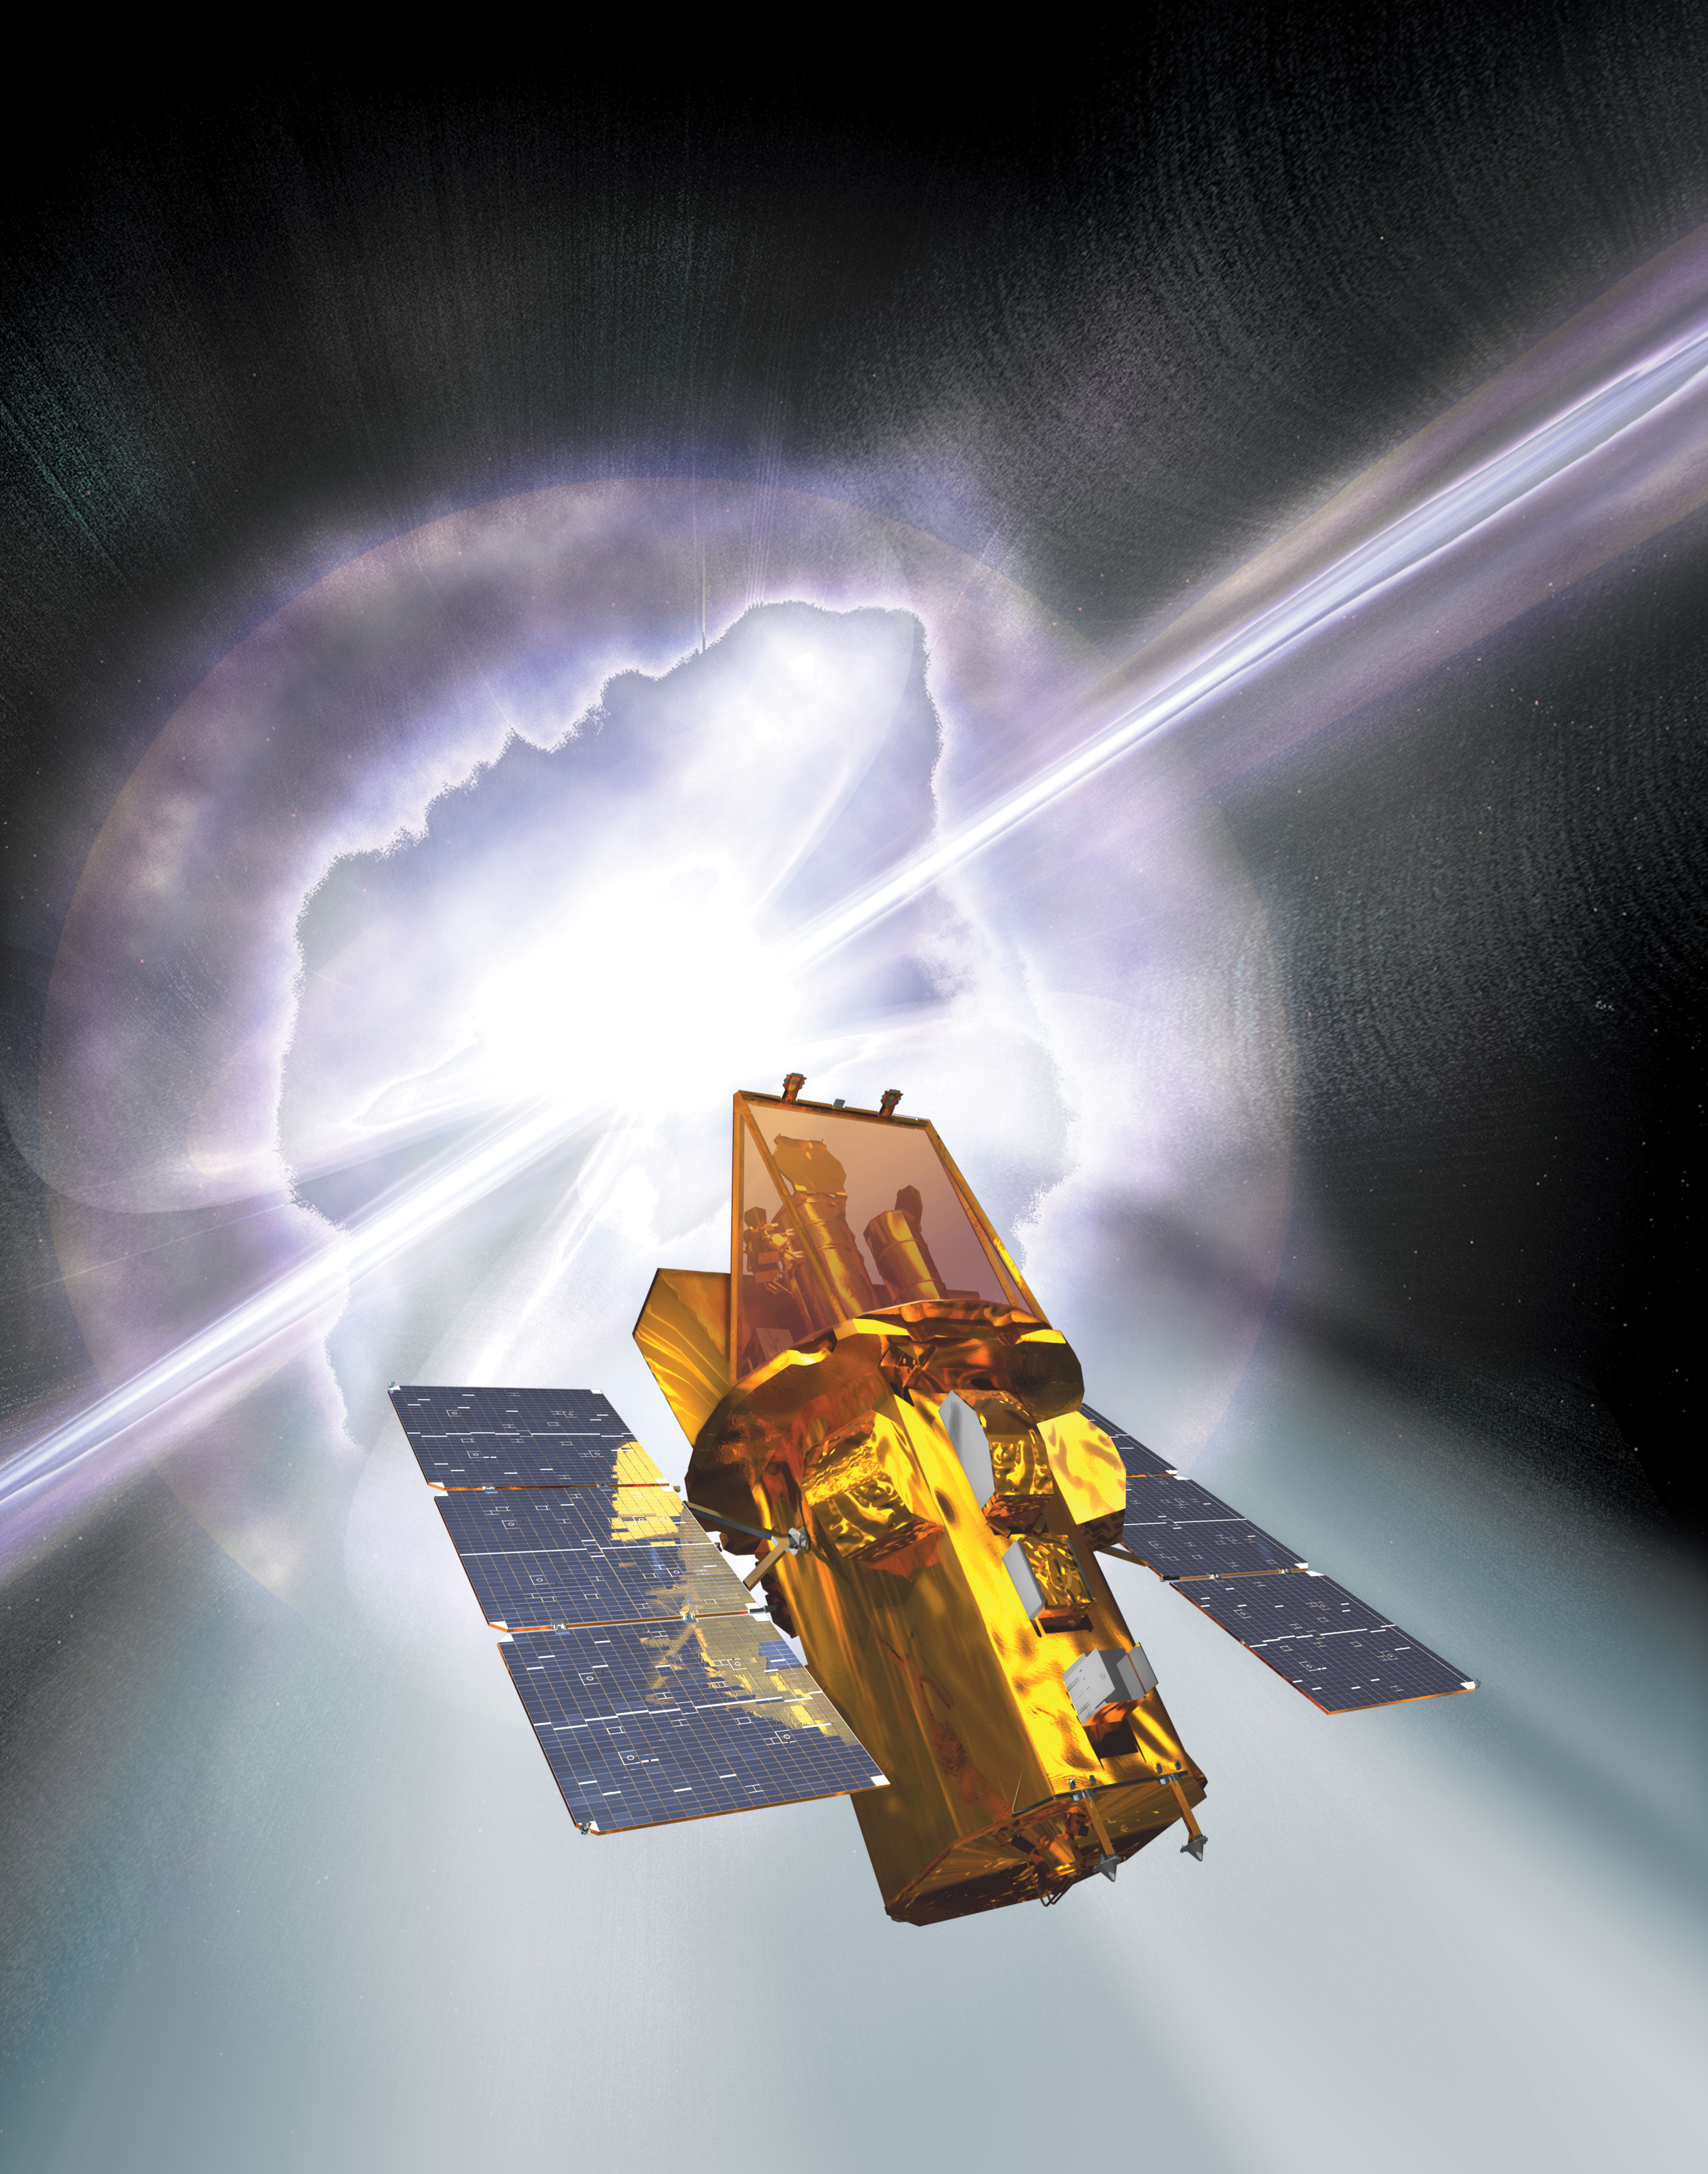 An artist's rendering of the Swift spacecraft with a gamma-ray burst going off in the background.